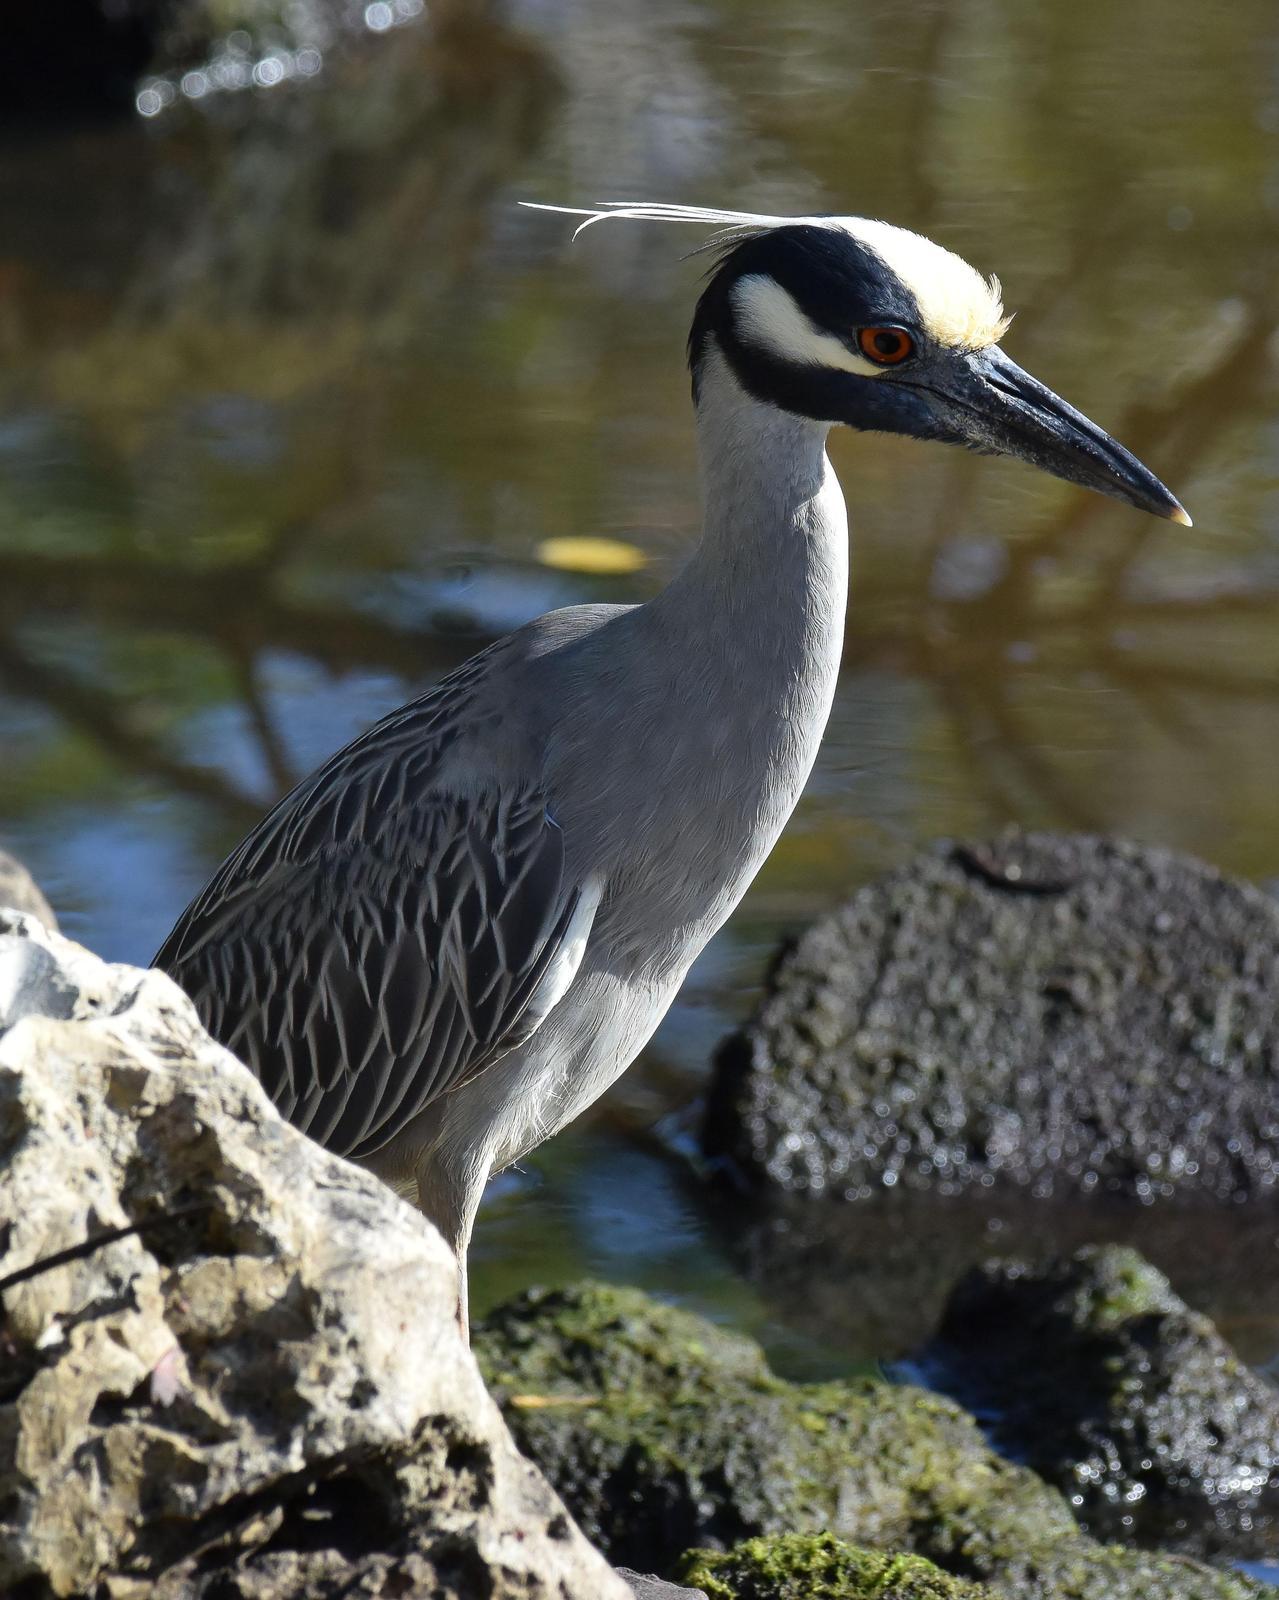 Yellow-crowned Night-Heron Photo by Emily Percival